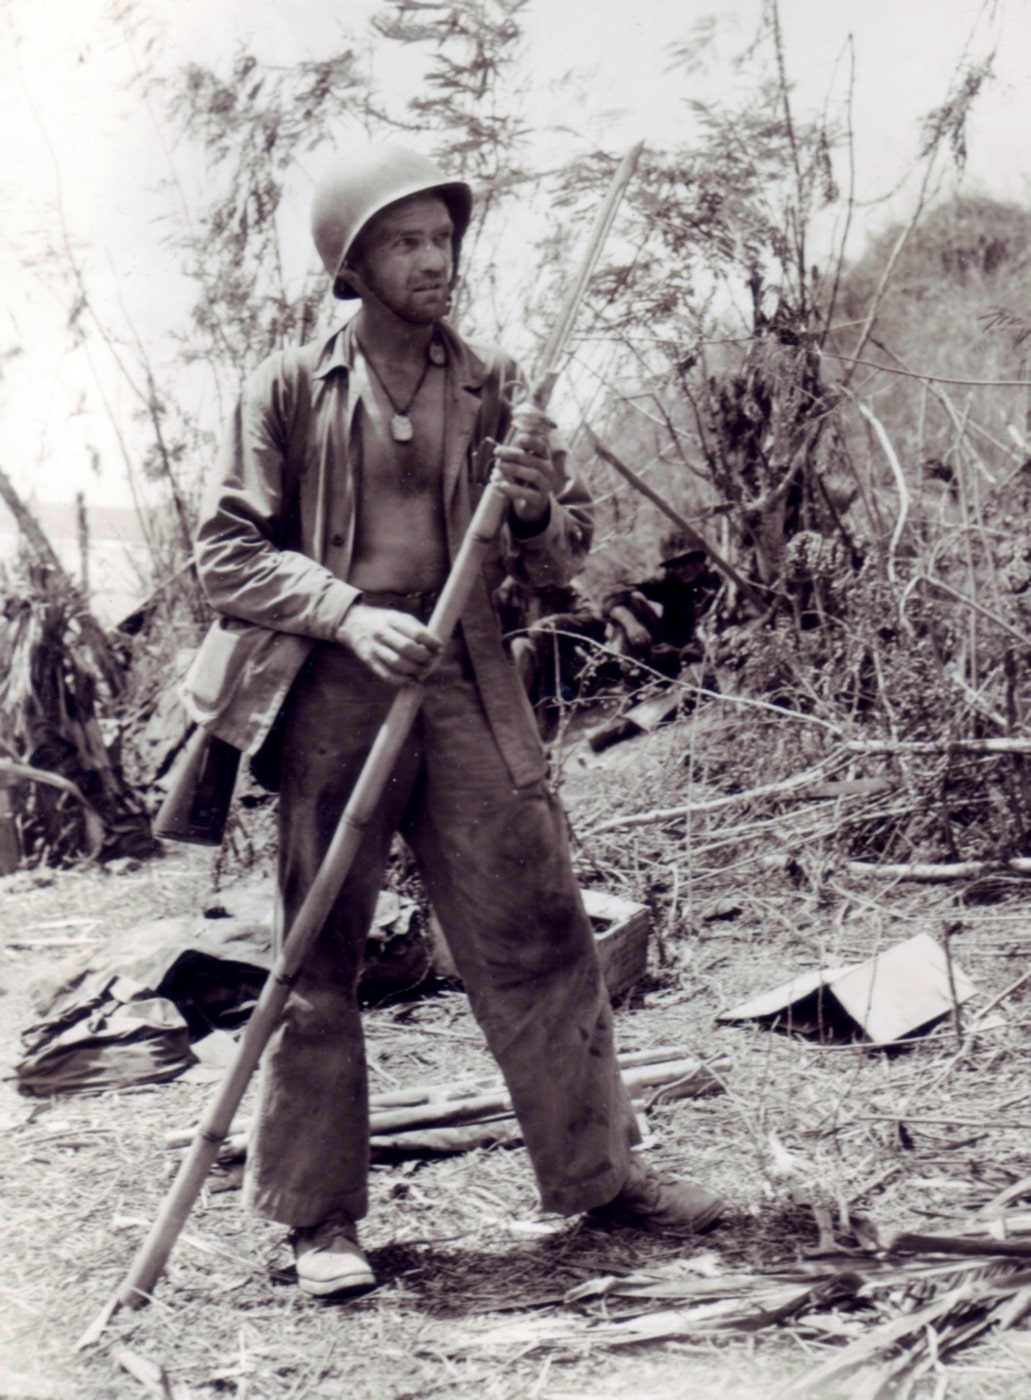 In this image, a U.S. Marine examines a Japanese spear made from a bamboo pole and a bayonet. The weapon was recovered on Saipan, Mariana Islands during World War II.